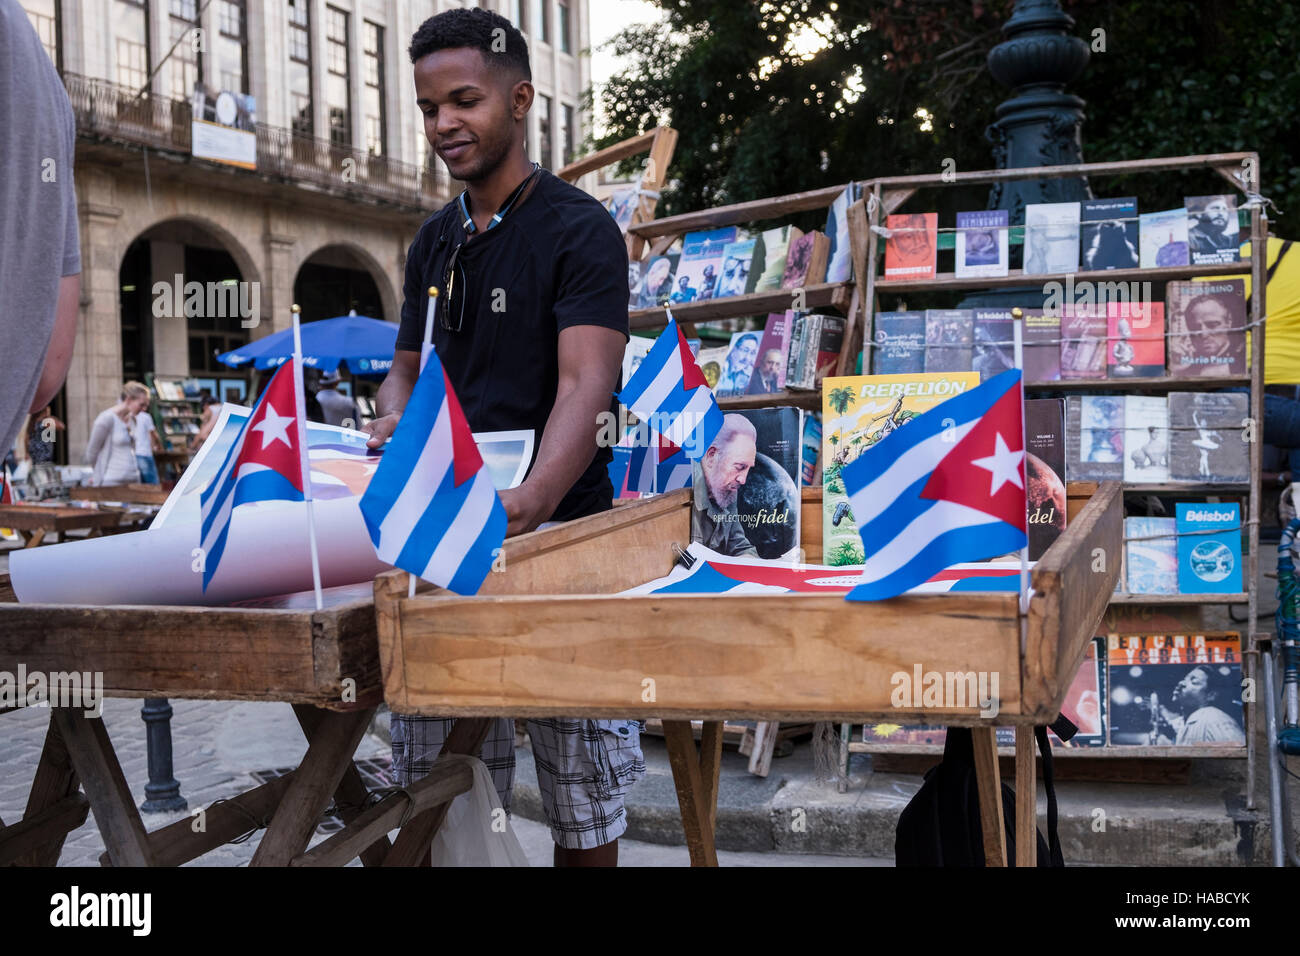 La Havana, Cuba, 26 November 2016. Scenes around the old town of La Havana on the day Castros death was announced. Cuban flags on the book and poster stalls in the Plaza Armas. Stock Photo